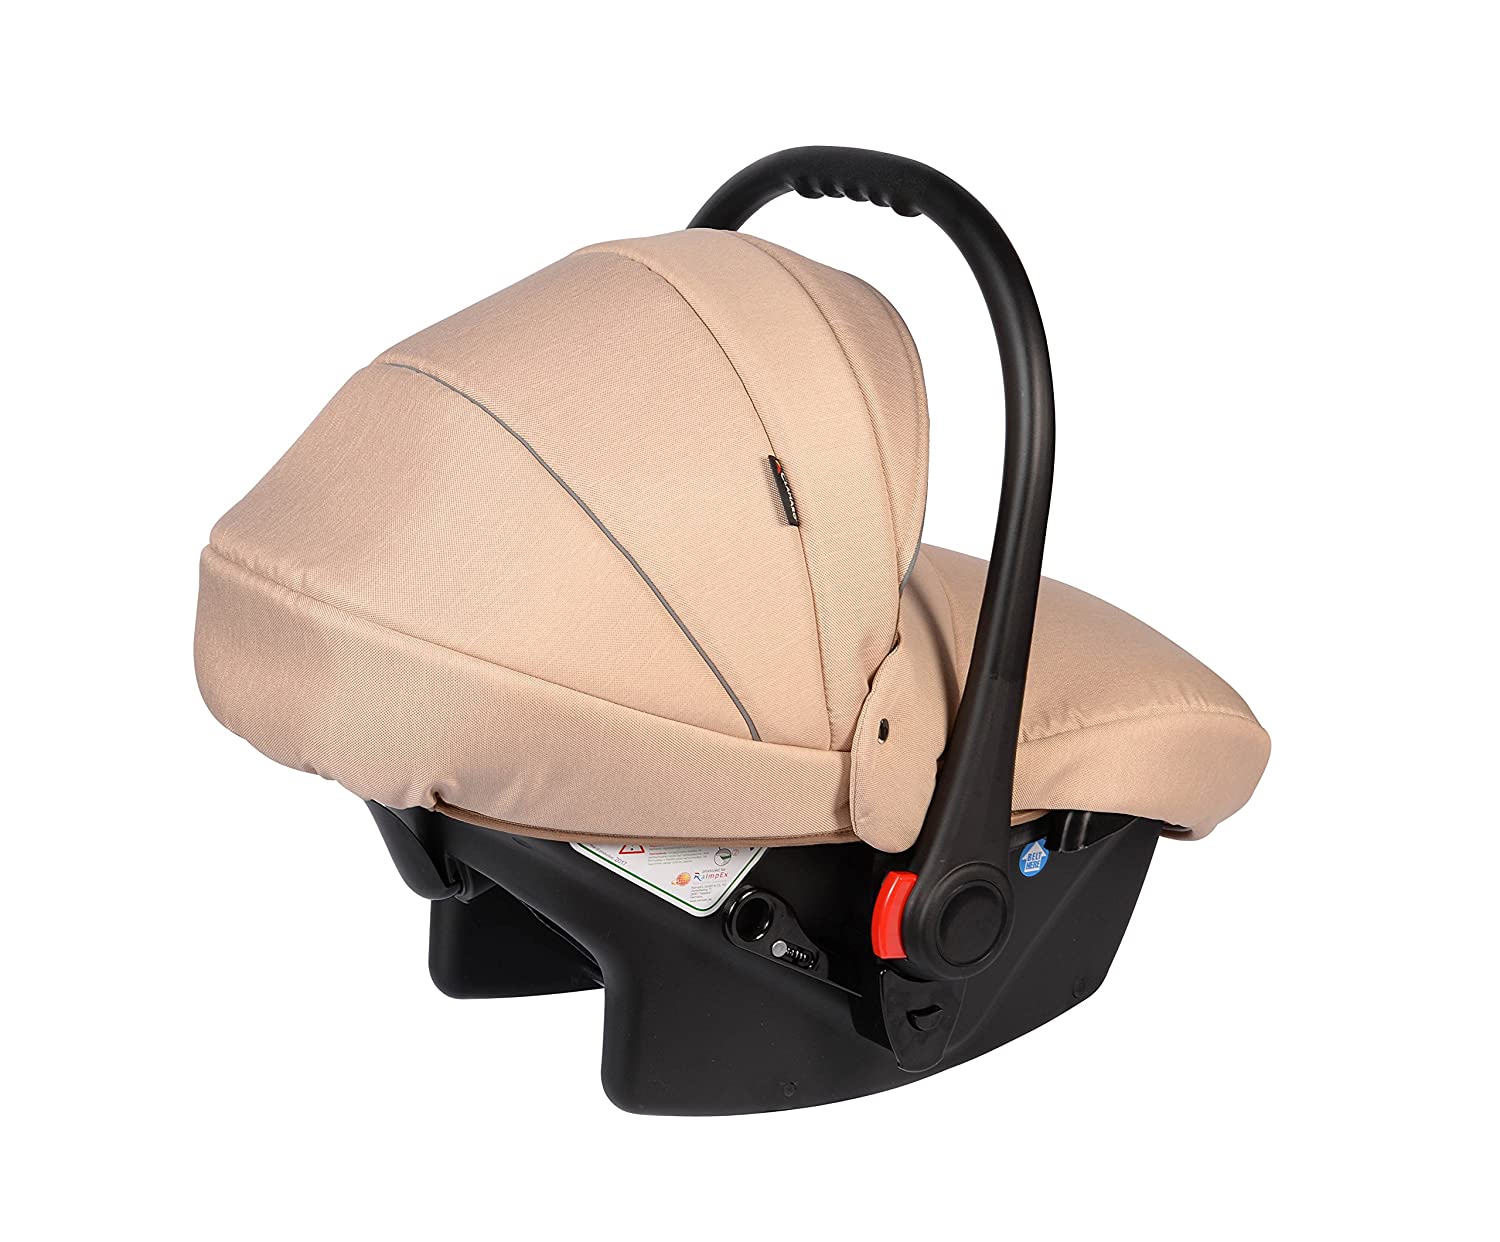 Clamaro JUNO Black Baby Car Seat Ultra Light 2.95 kg with Anti-Shock Foam Group 0+ (0-13 kg) ECE-R 44/04 - Baby Car Seat Including Sun Canopy and Foot Cover - Beige Linen